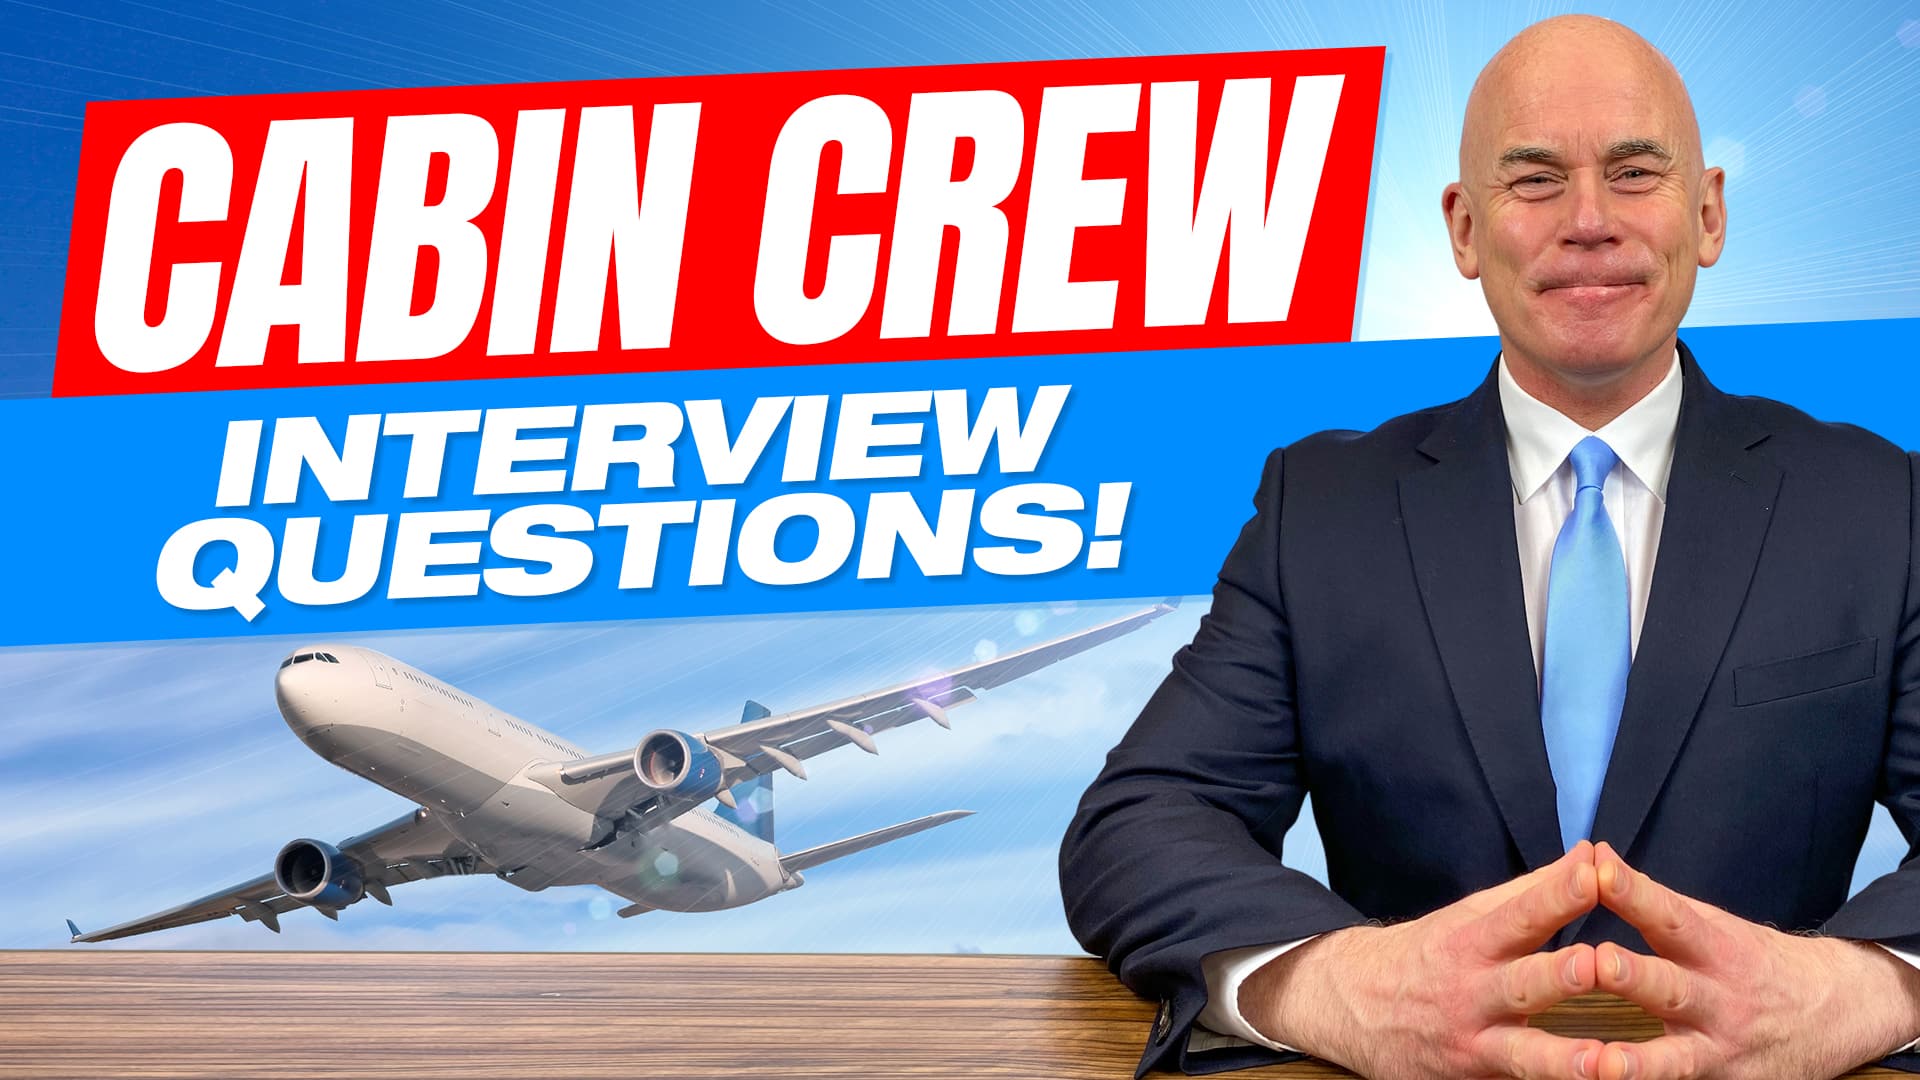 factory ecstasy Vacant Cabin Crew Interview Questions & Answers | Flight Attendant Interview